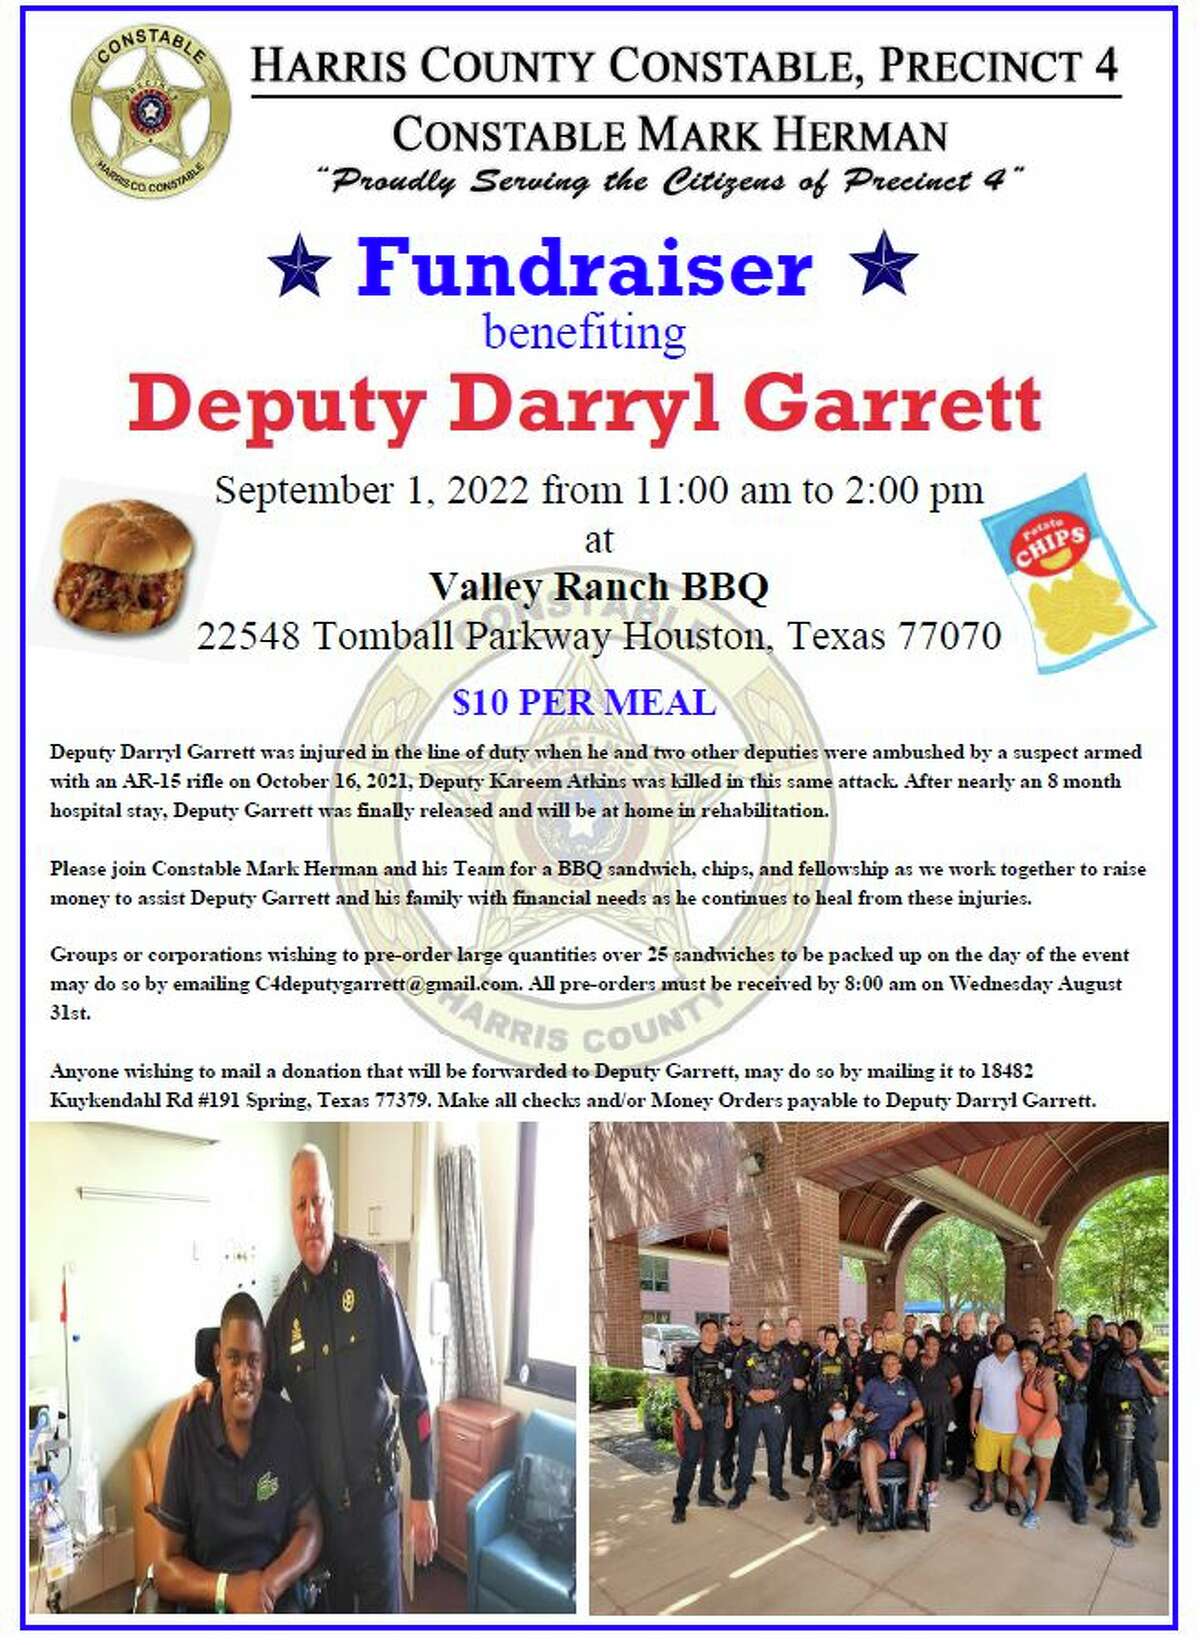 The constable’s department will hold a fundraiser benefitting Deputy Darryl Garrett on Sept. 1 from 11 a.m. to 2 p.m. at Valley Ranch BBQ, 22548 Tomball Parkway.